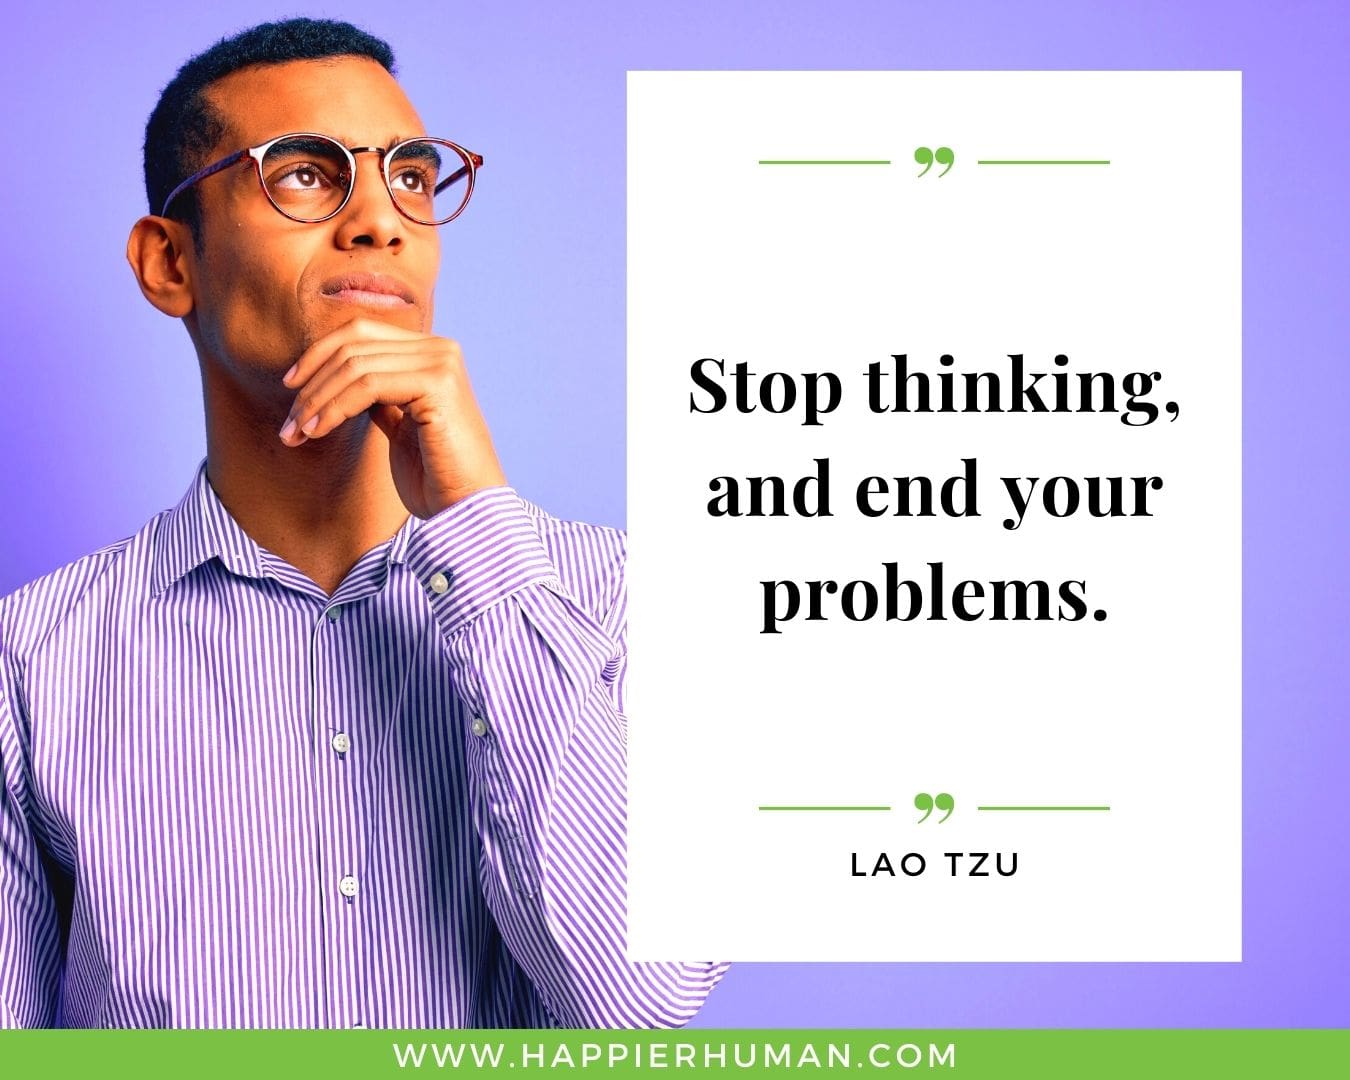 Overthinking Quotes - “Stop thinking, and end your problems.” - Lao Tzu